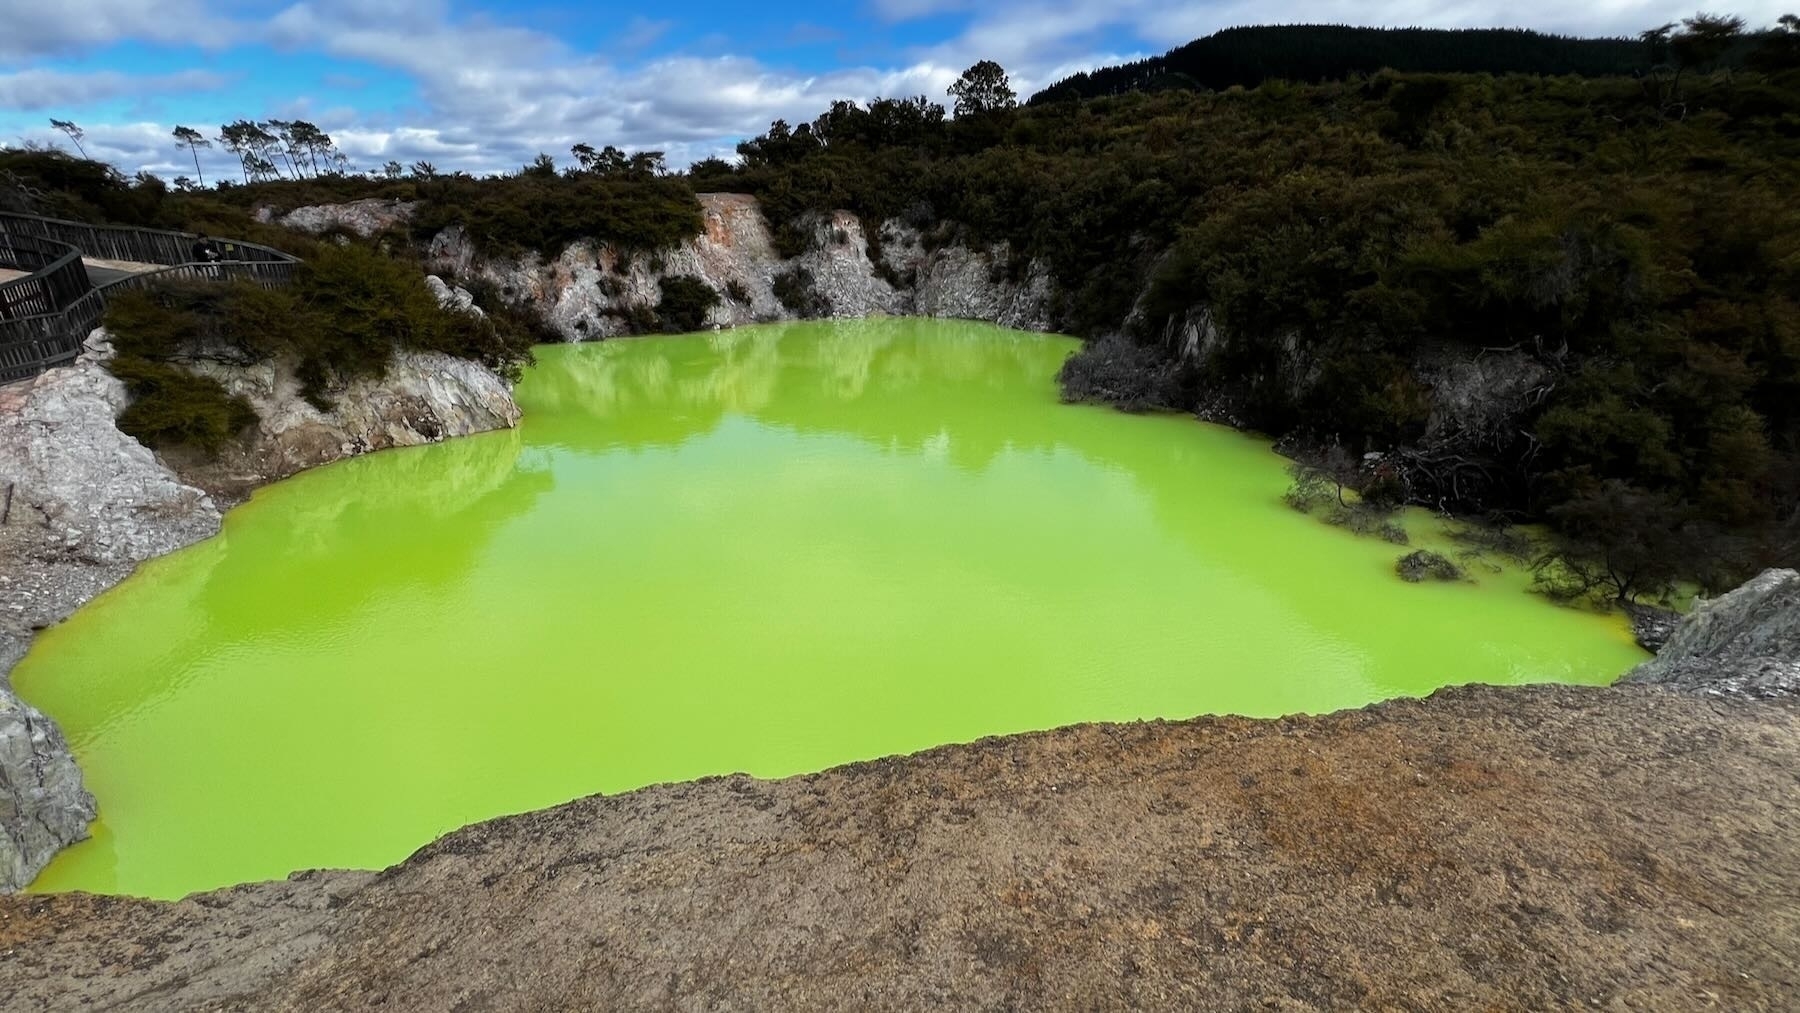 Bright yellow green lake in a crater, surrounded by white rock and dark green bush. 